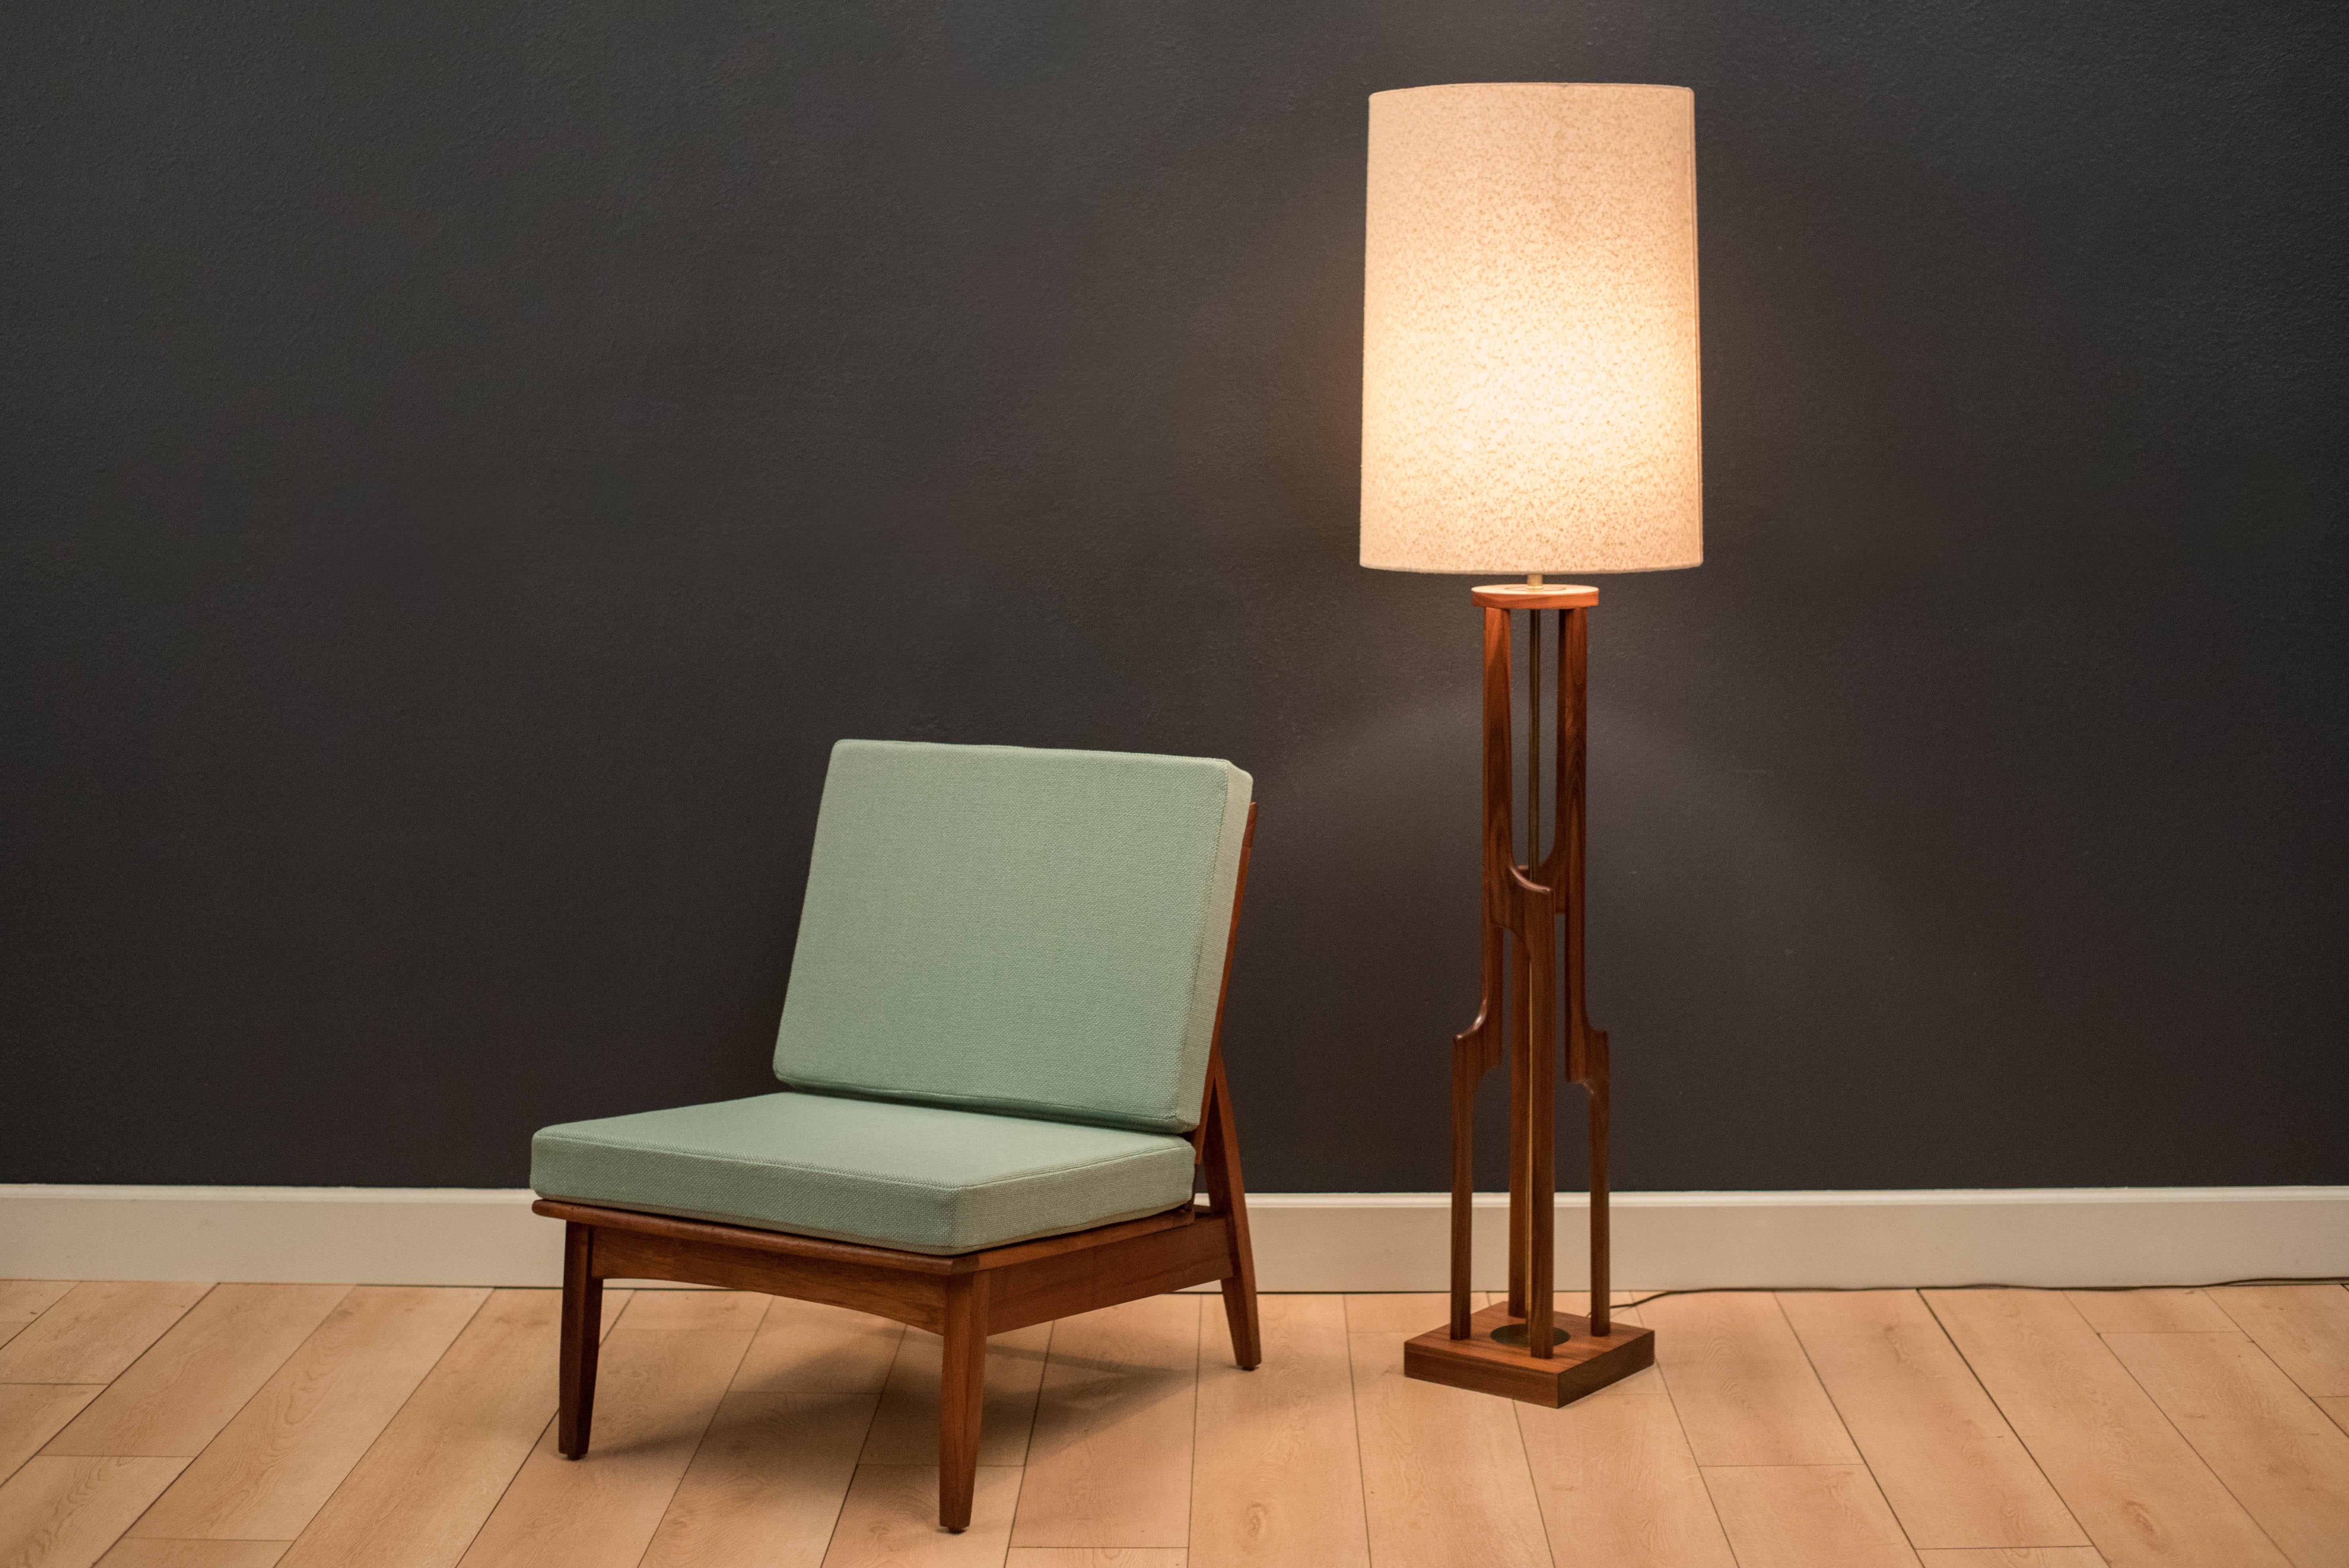 Mid-Century Modern floor lamp by Modeline, circa 1960s. This piece displays well from any angle and features a sculptural walnut base and brass accents. Original drum shade included.